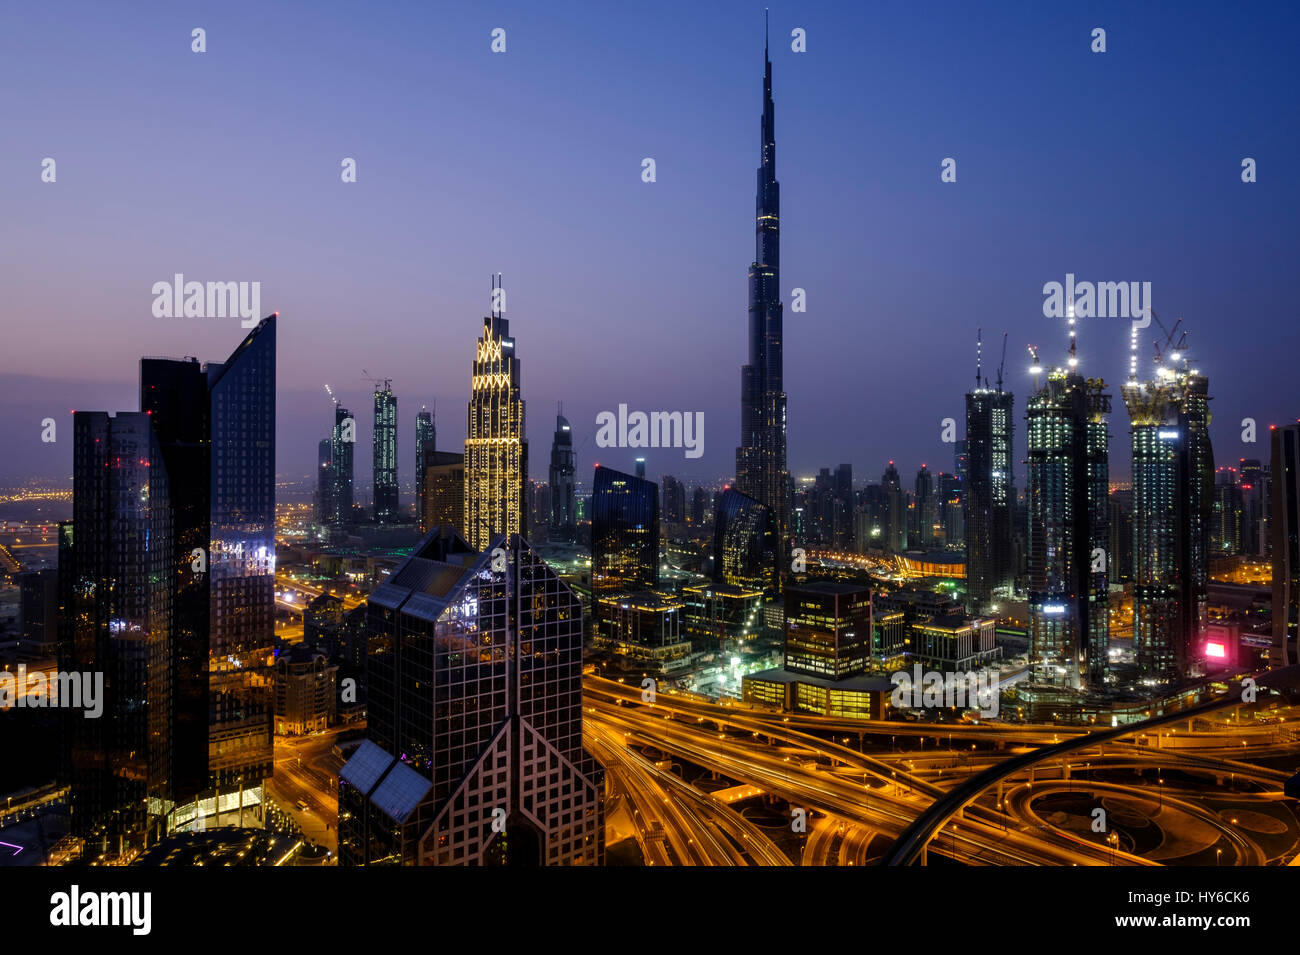 UNITED ARAB EMIRATES, DUBAI - CIRCA JANUARY 2017: Sheikh Zayed Road and Burj Khalifa at dawn in Dubai. This is the main artery of the city and is home Stock Photo